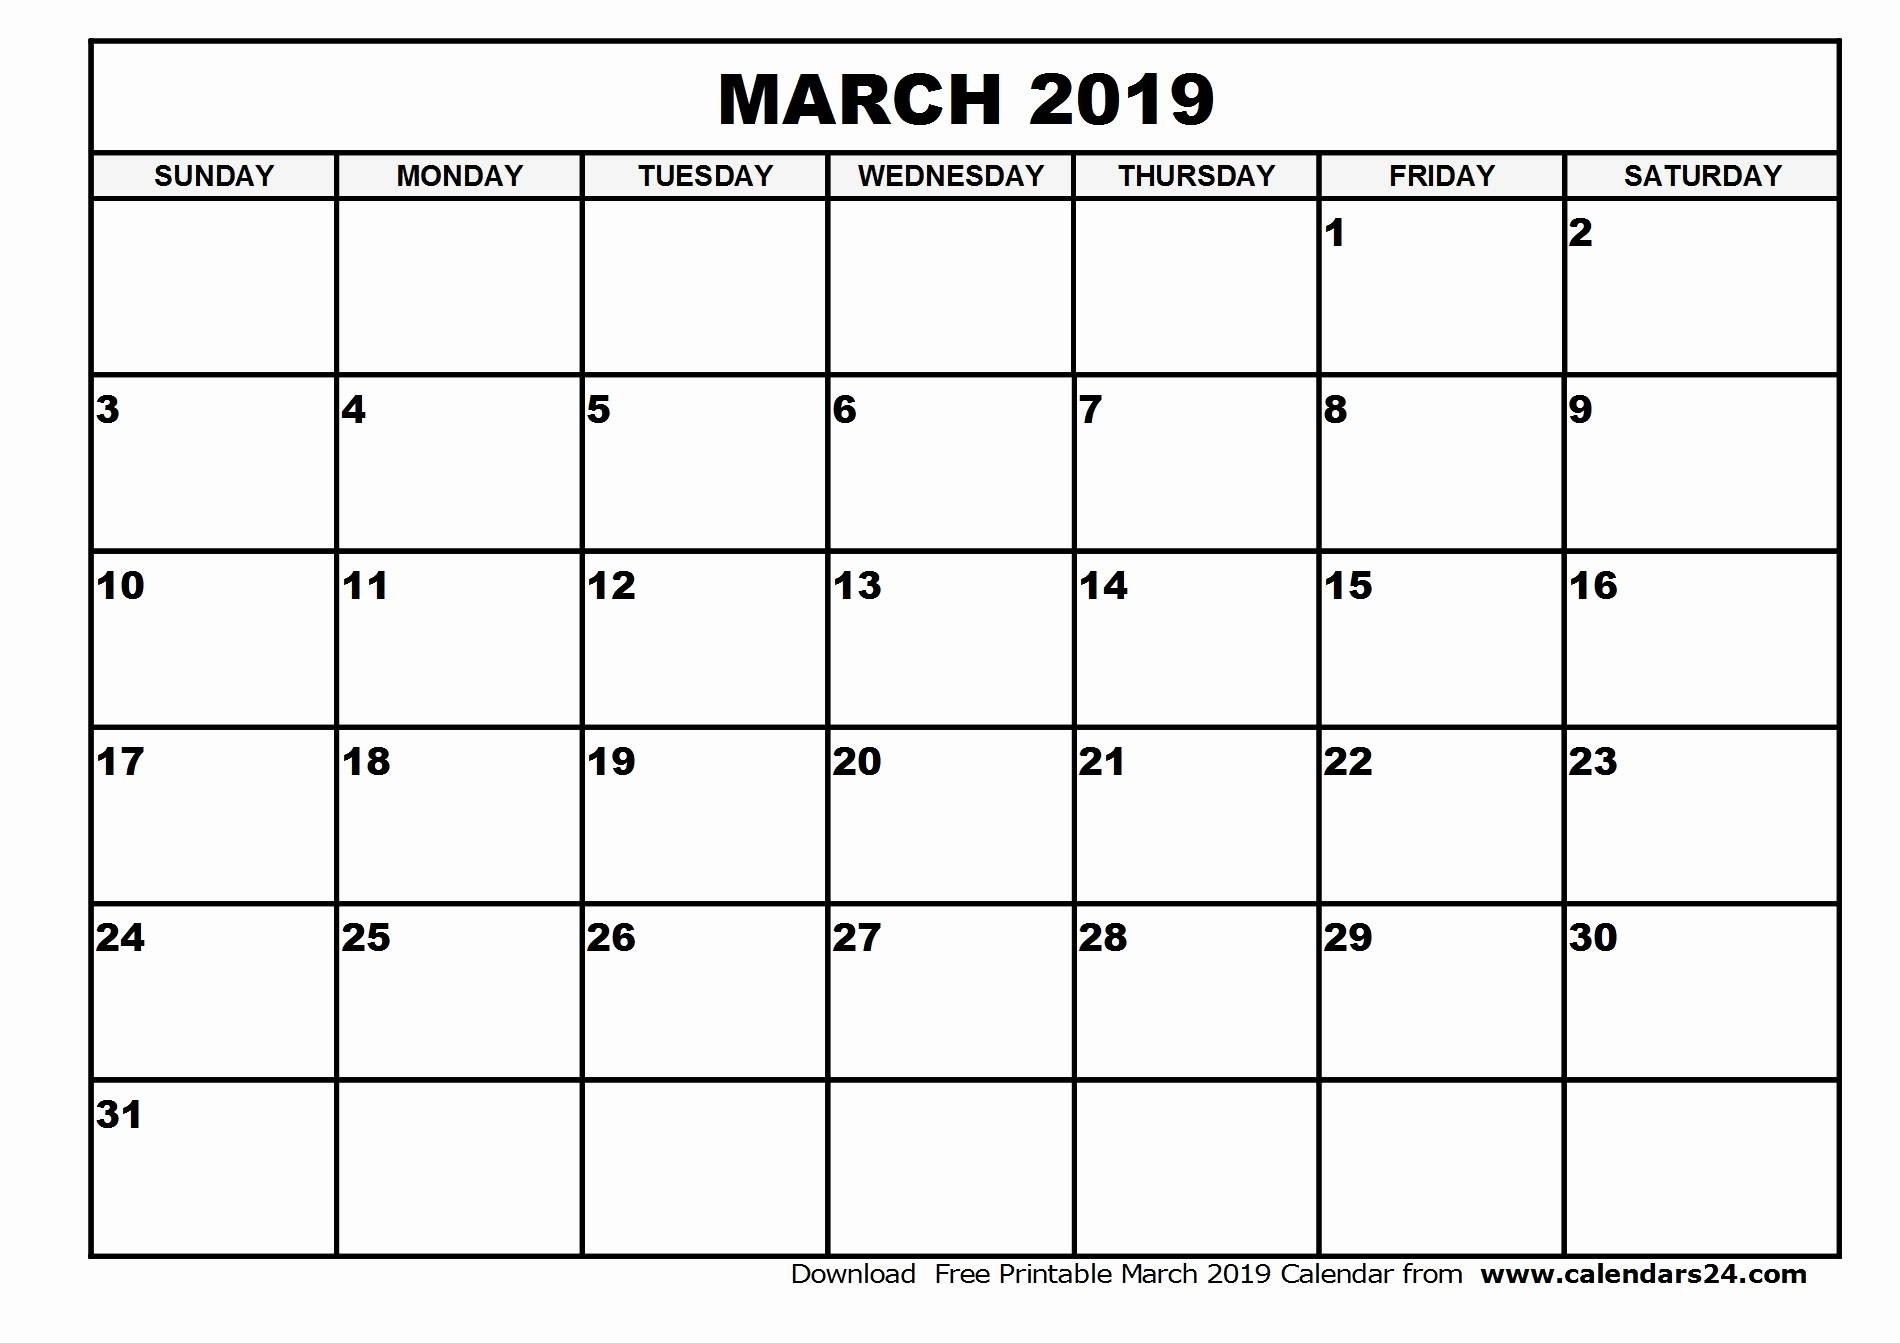 Blank March 2019 Calendar Templates Printable Download - July 2019 inside Free Editable And Printable Monthly Calendar